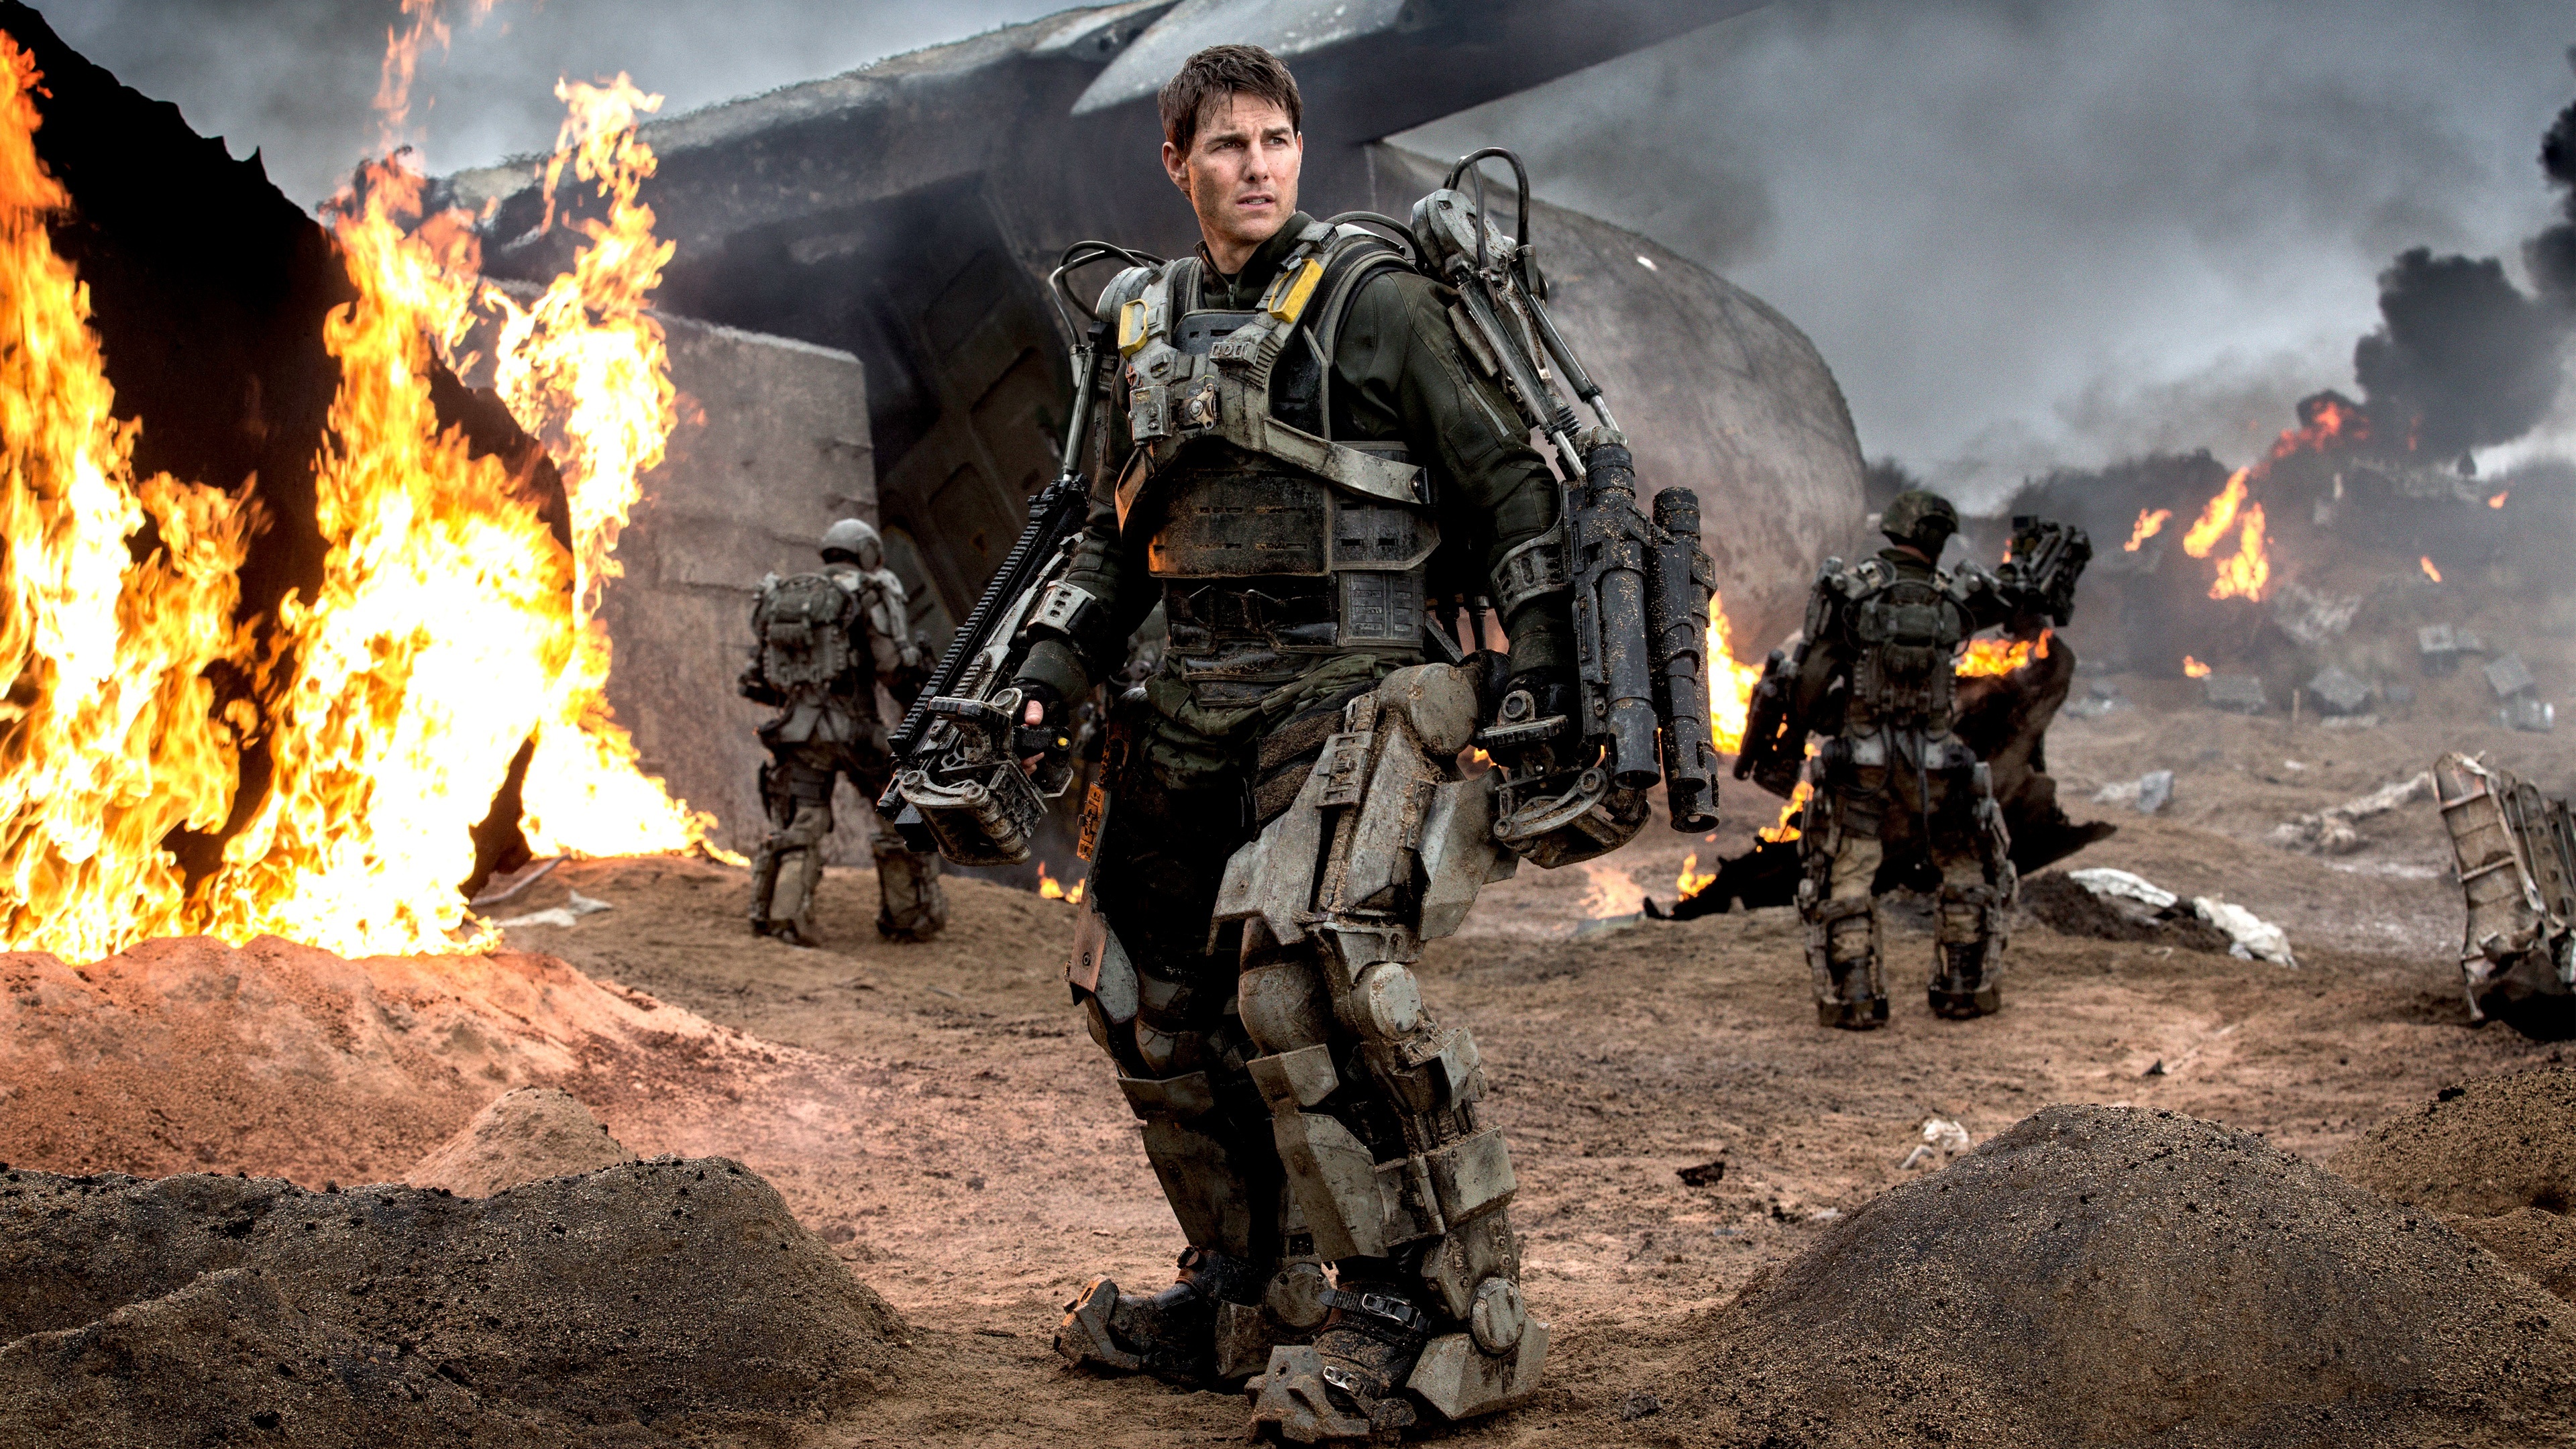 The brink of the future, Tom Cruise soldiers, Free pictures, Futuristic theme, 3840x2160 4K Desktop